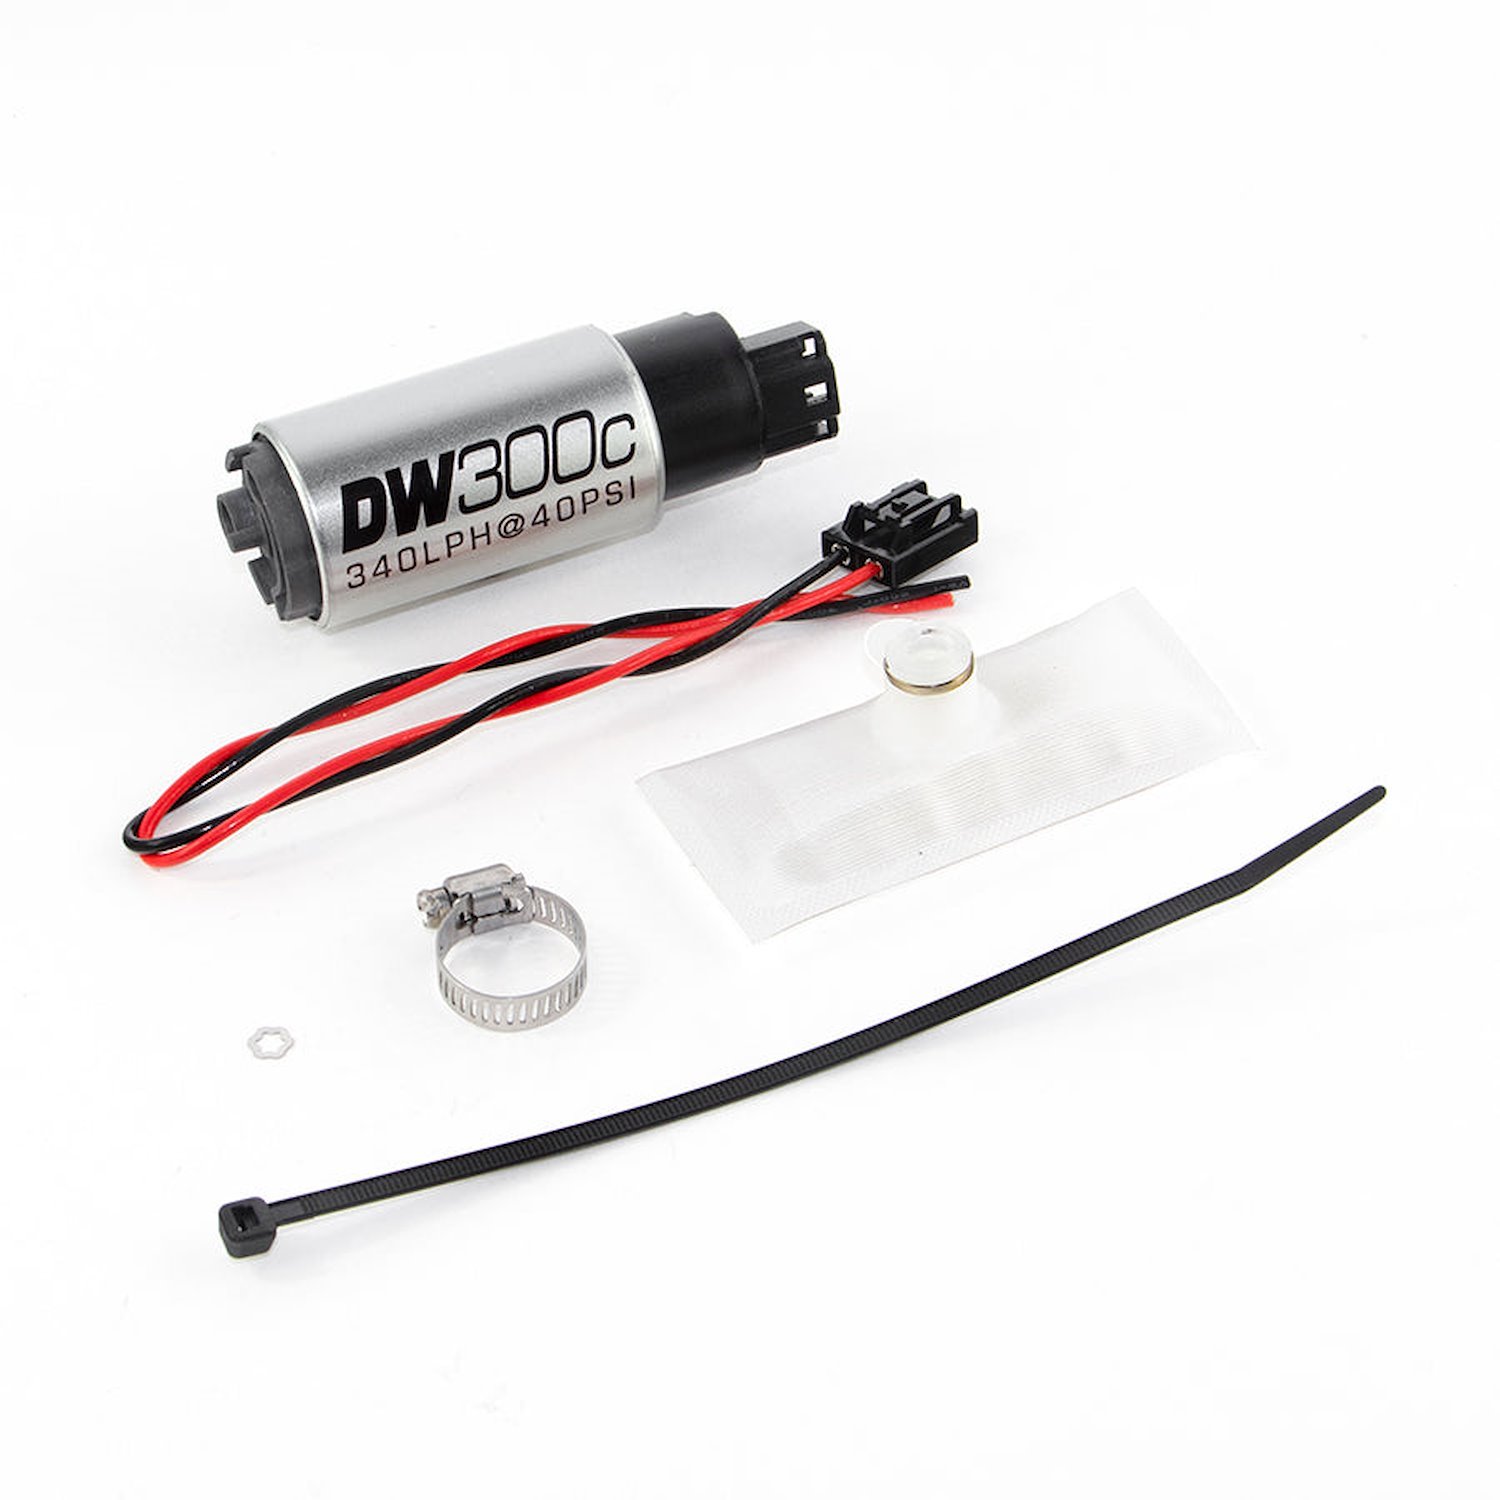 93071030 DW300C Series 340lph Compact Fuel Pump without mounting clips w /Install Kit for BMW